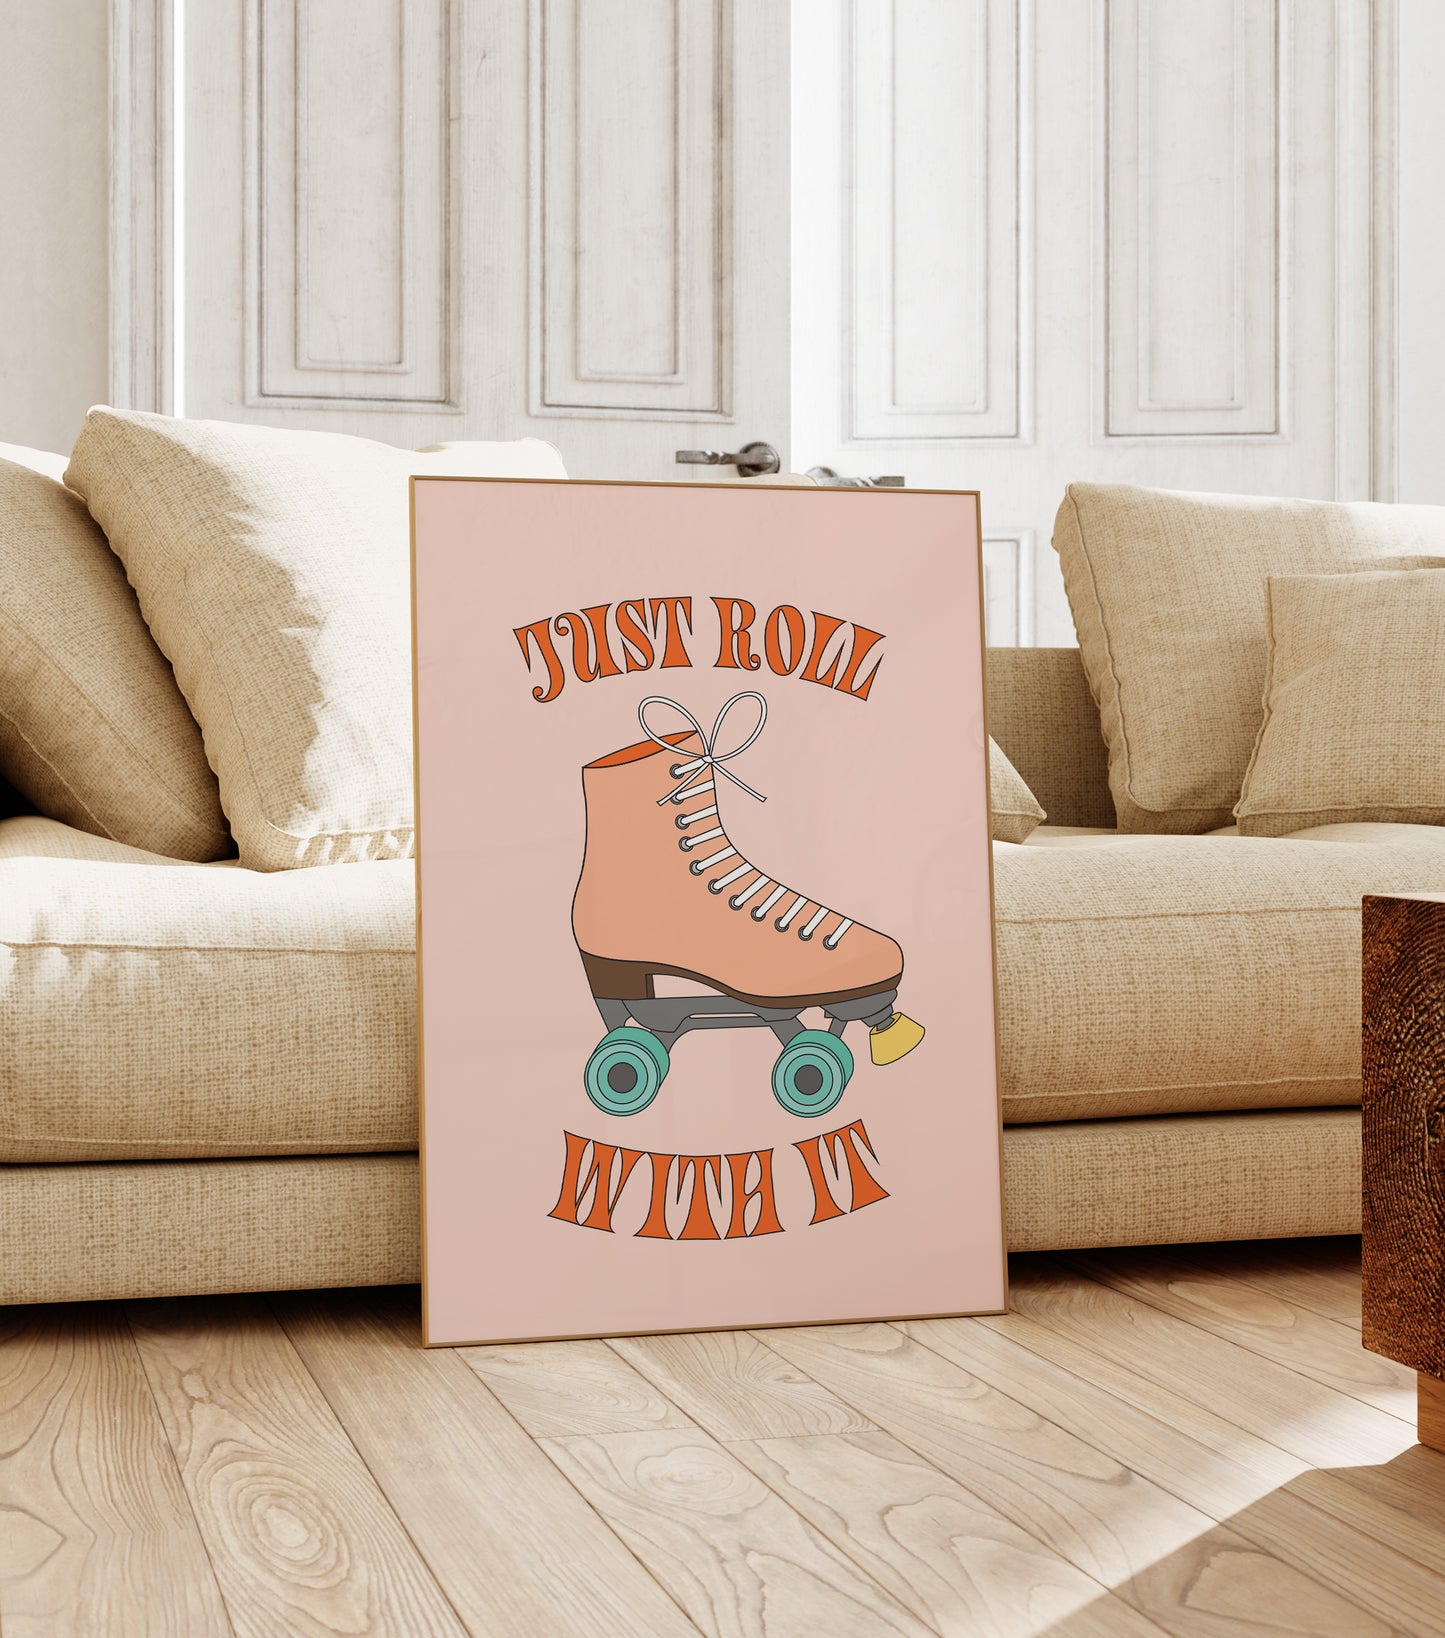 Just Roll With It - Art Print